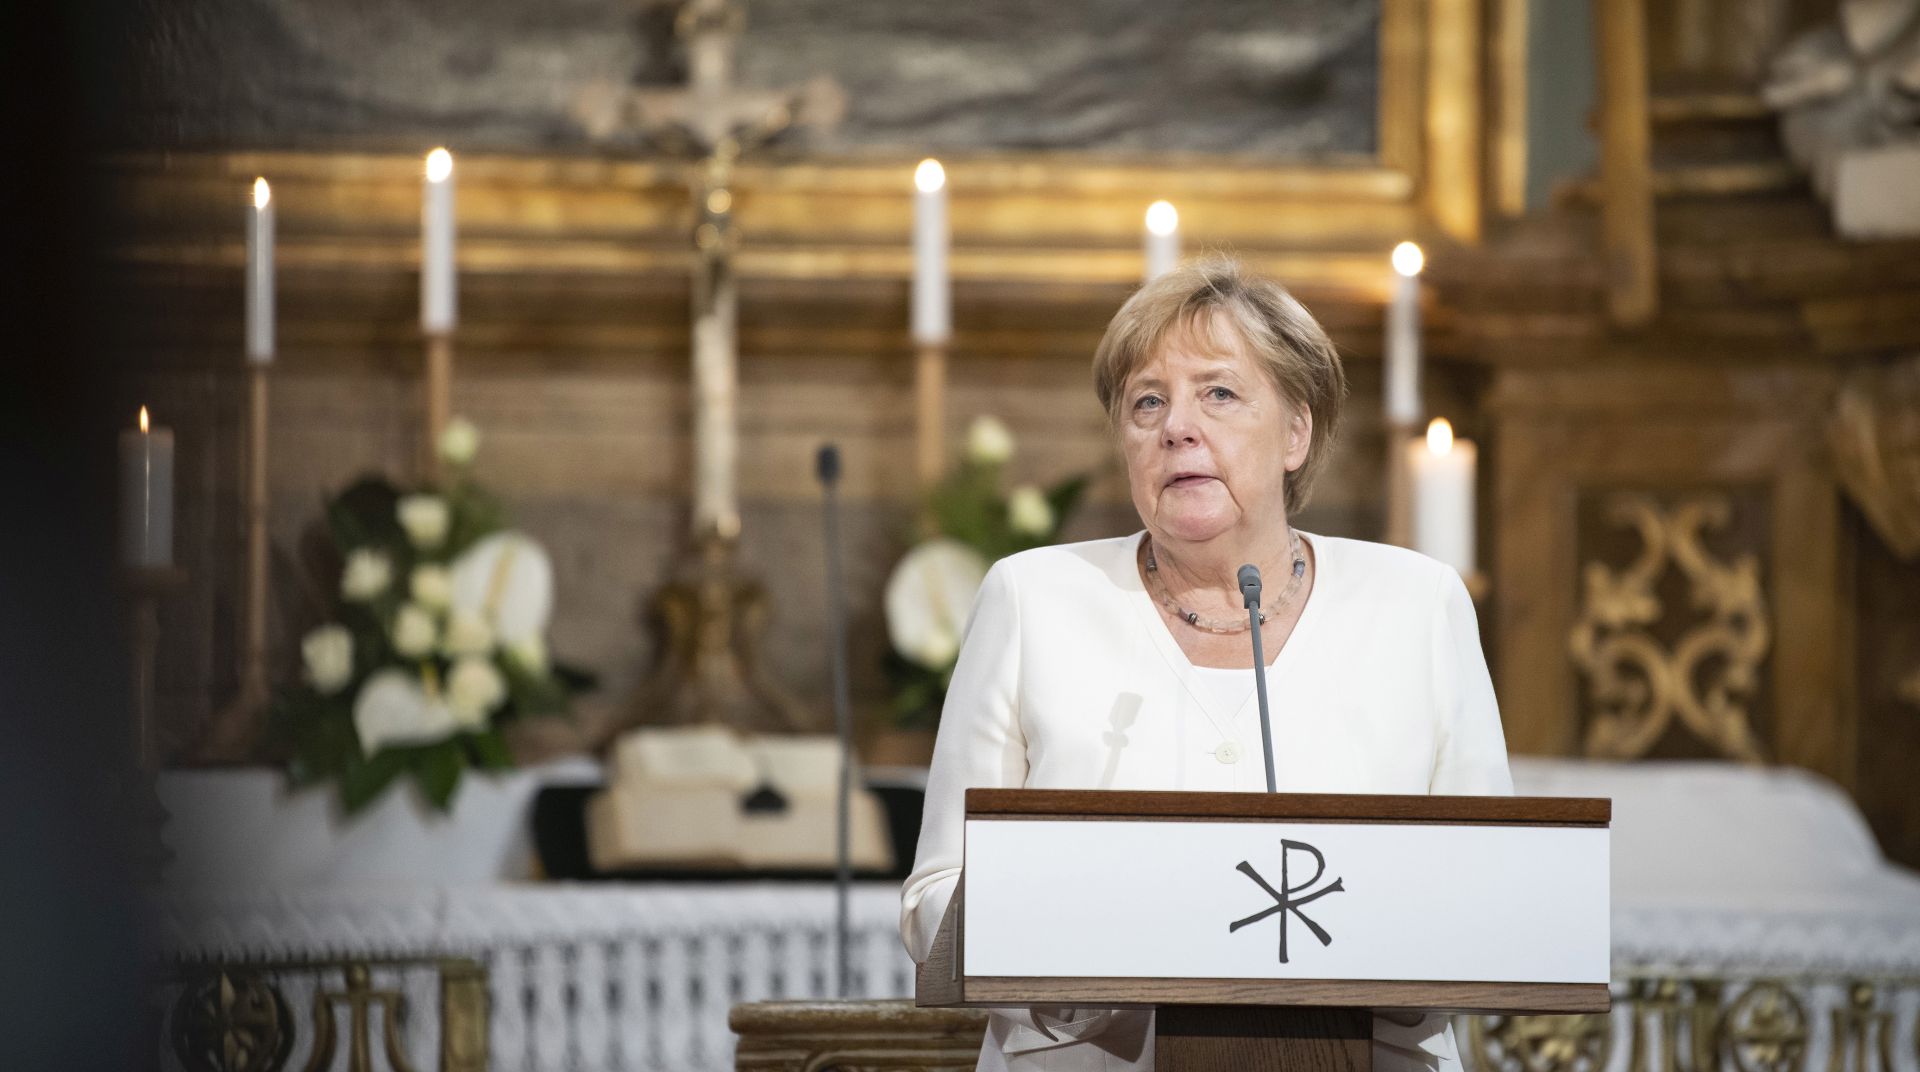 epa07780388 A handout photo made available by the German Federal Government (Bundesregierung) shows German Chancellor Angela Merkel delivering a speech in the Evangelical Church of Sopron on the occasion of the 30th anniversary of the pan-European picnic, in Sopron, Hungary, 19 August 2019. Merkel is in Sopron to attend the 30th anniversary of the beginning of the dismantling of the iron curtain between Hungary and Austria.  EPA/GUIDO BERGMANN/GERMAN FEDERAL GOVERNMENT HANDOUT  HANDOUT EDITORIAL USE ONLY/NO SALES